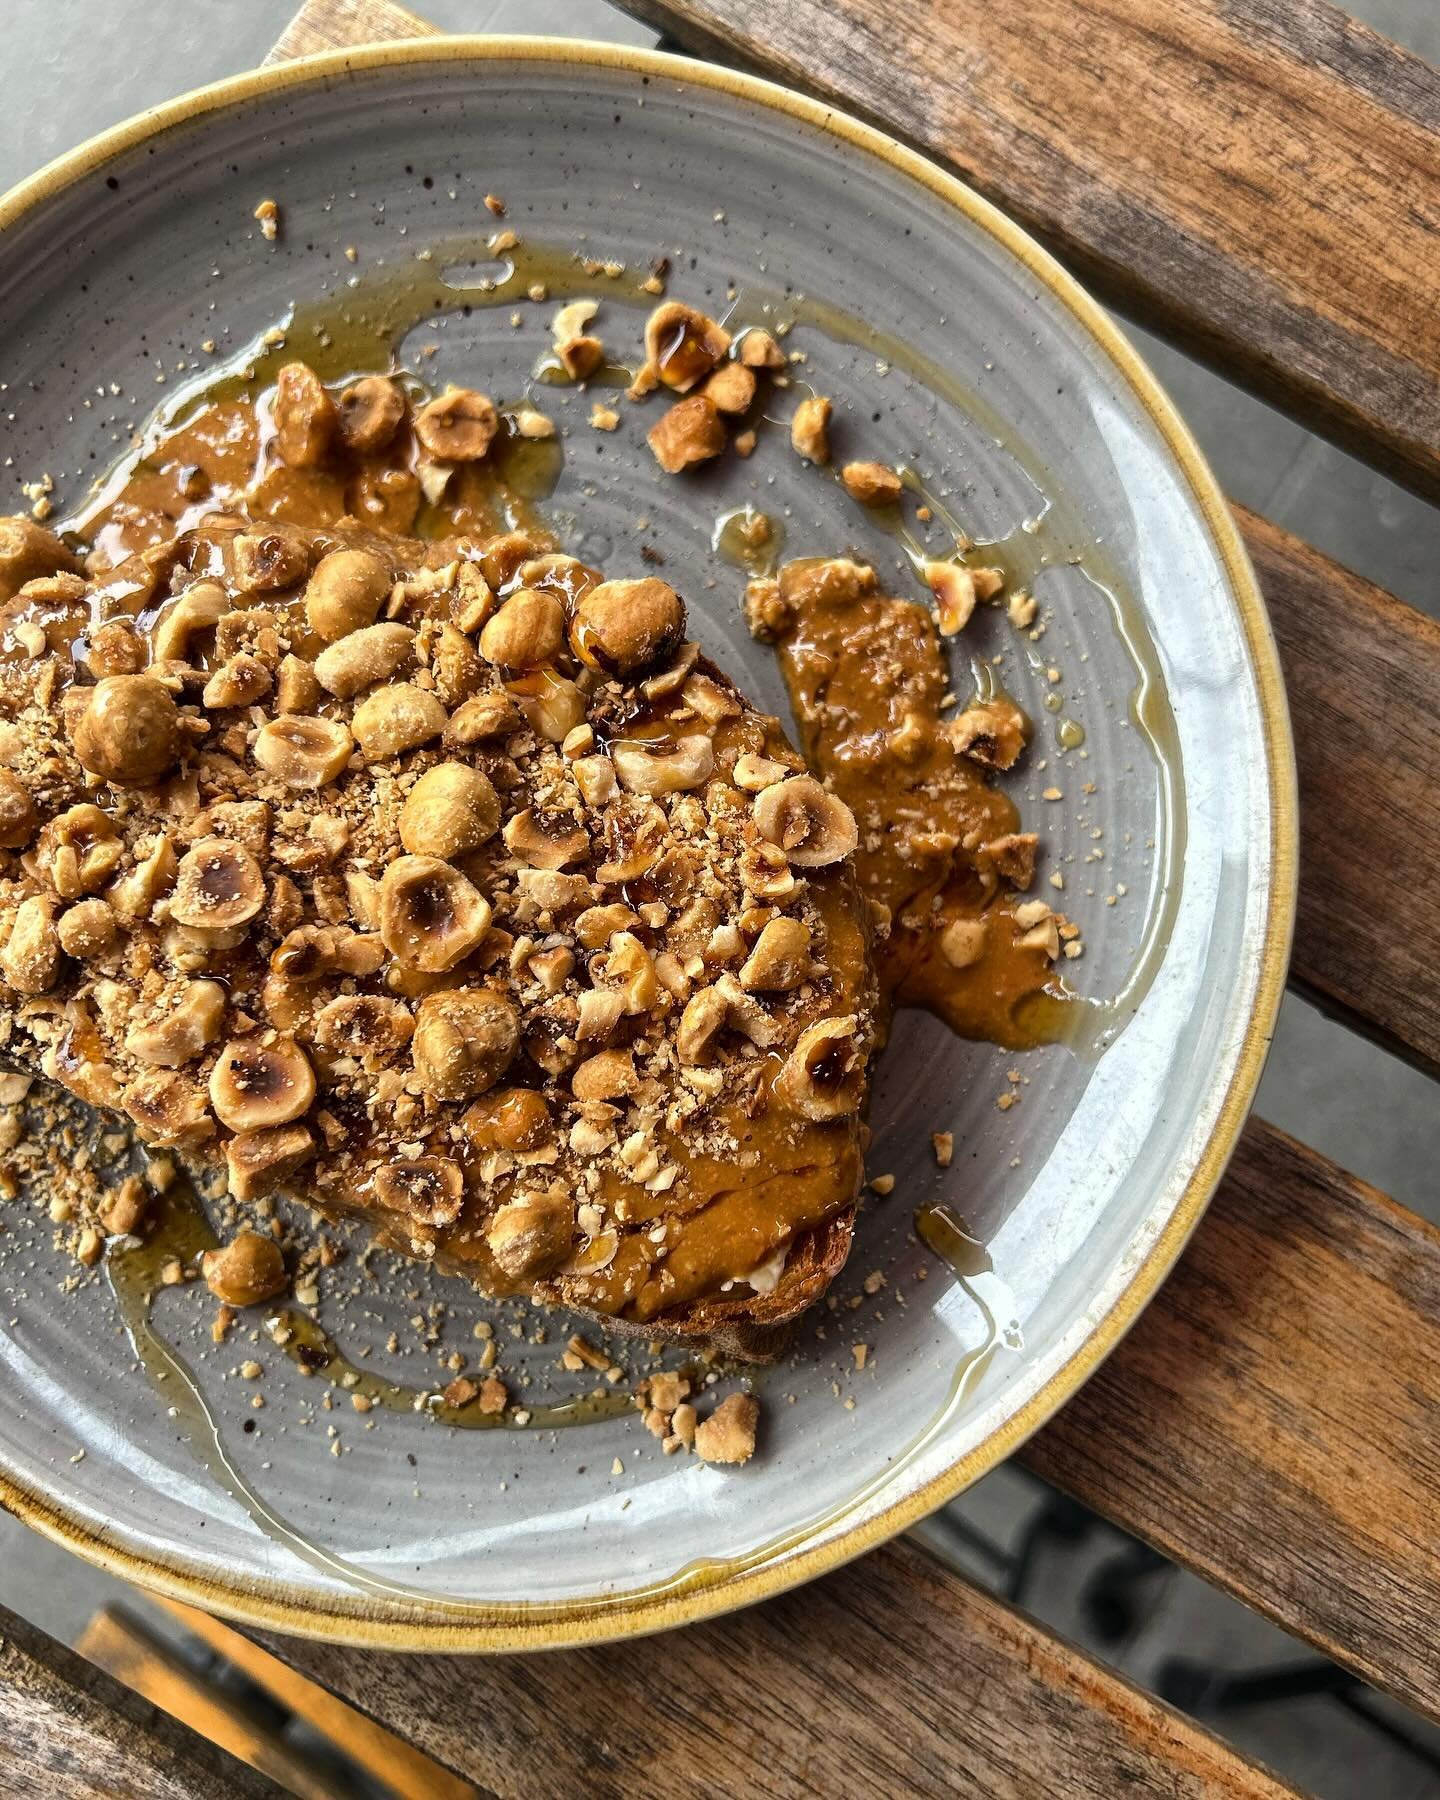 Sourdough toast slathered with housemade hazelnut butter, maple syrup and roasted hazelnuts plated so beautifully by our wonderful chefs 🌰